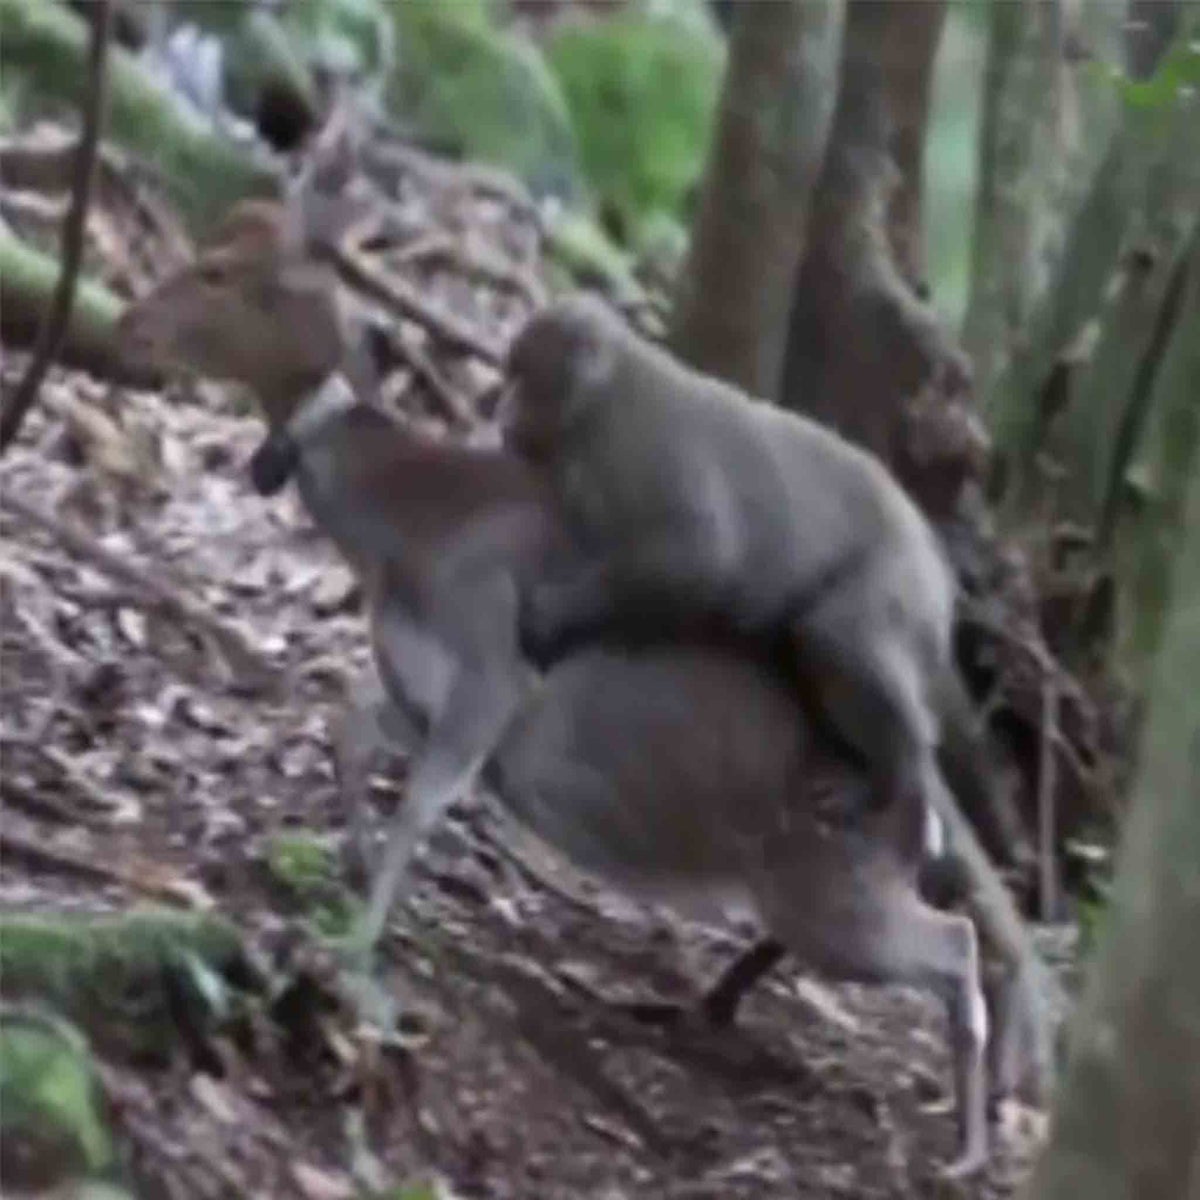 Monkey Sex Art - Sex between monkey and deer may be a new 'behavioural tradition',  scientists say | The Independent | The Independent